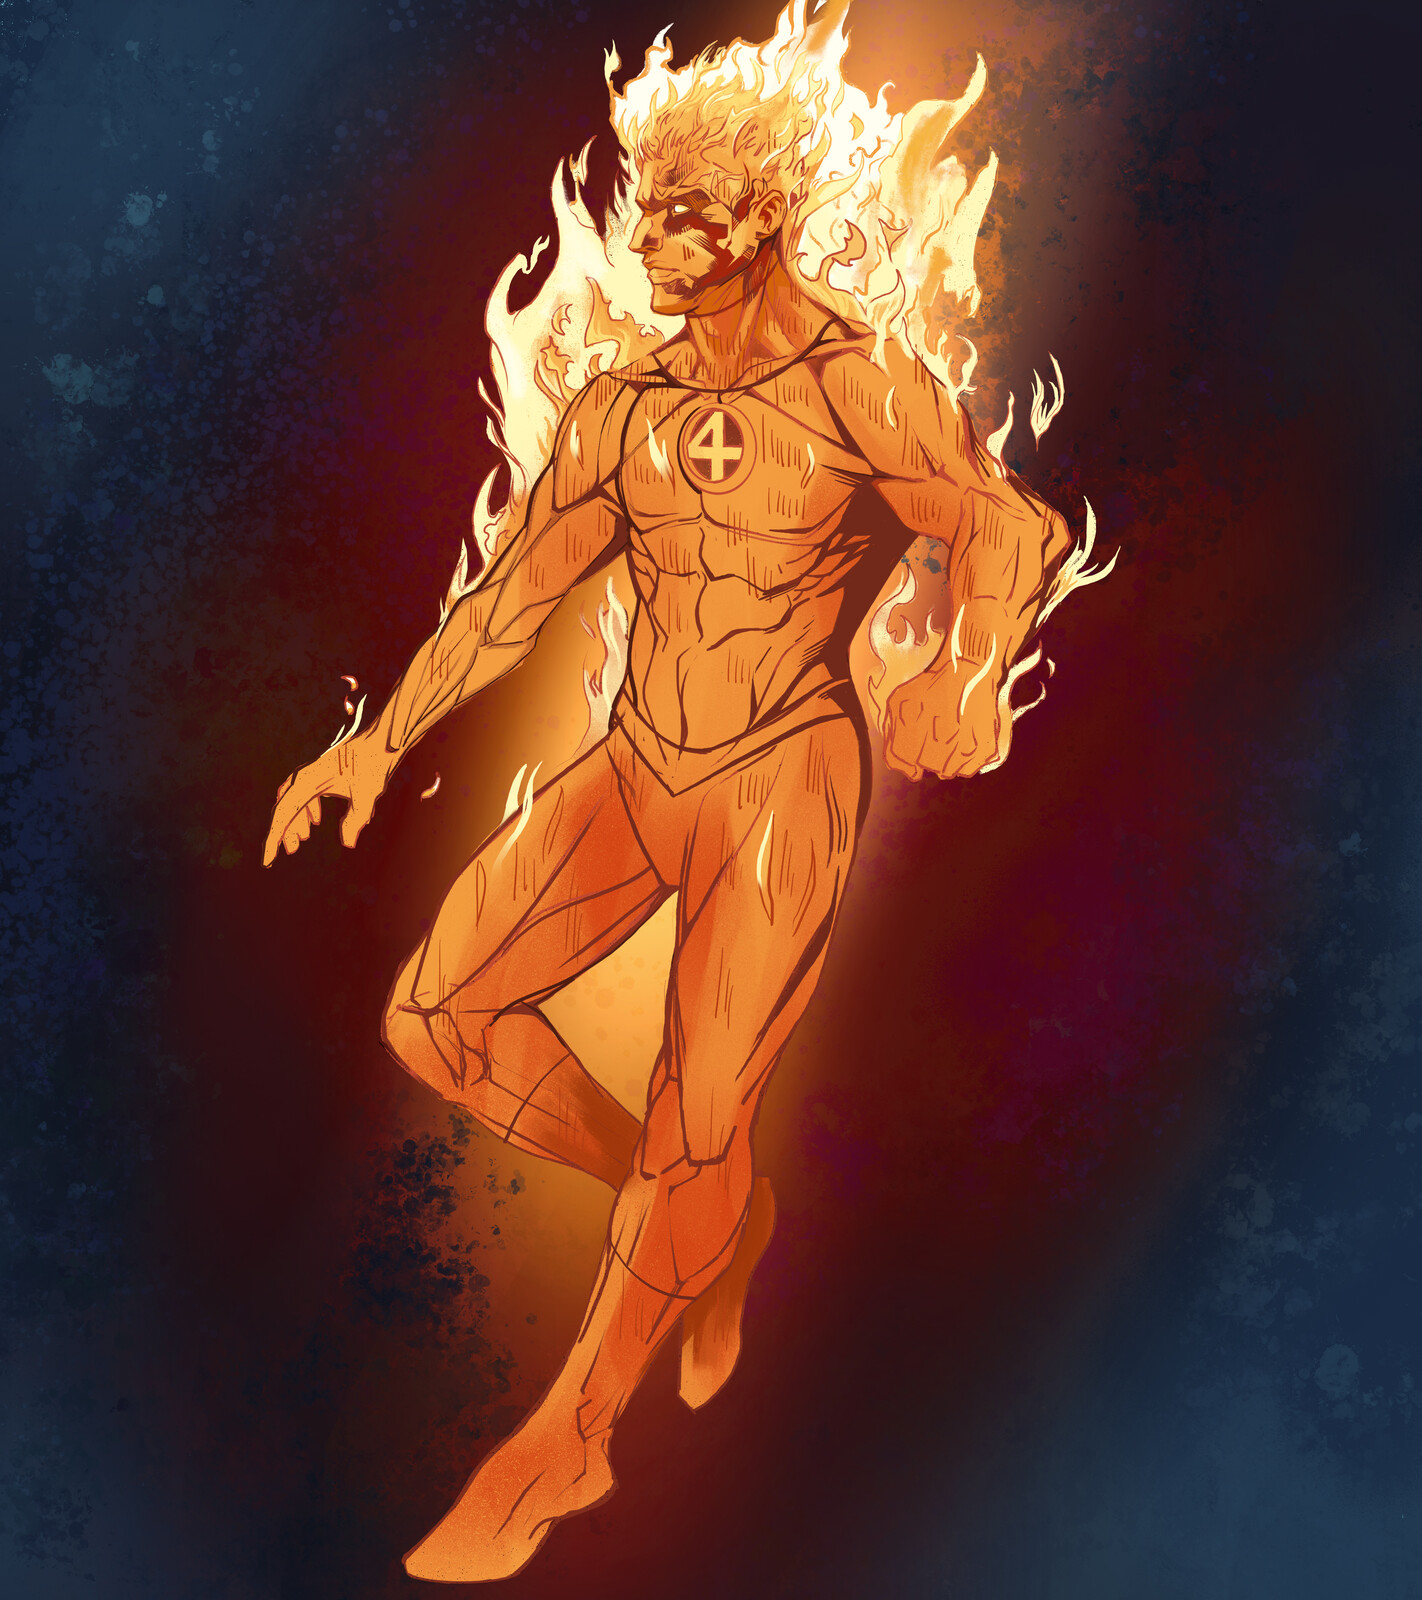 Johnny Storm - "FLAME ON!!"